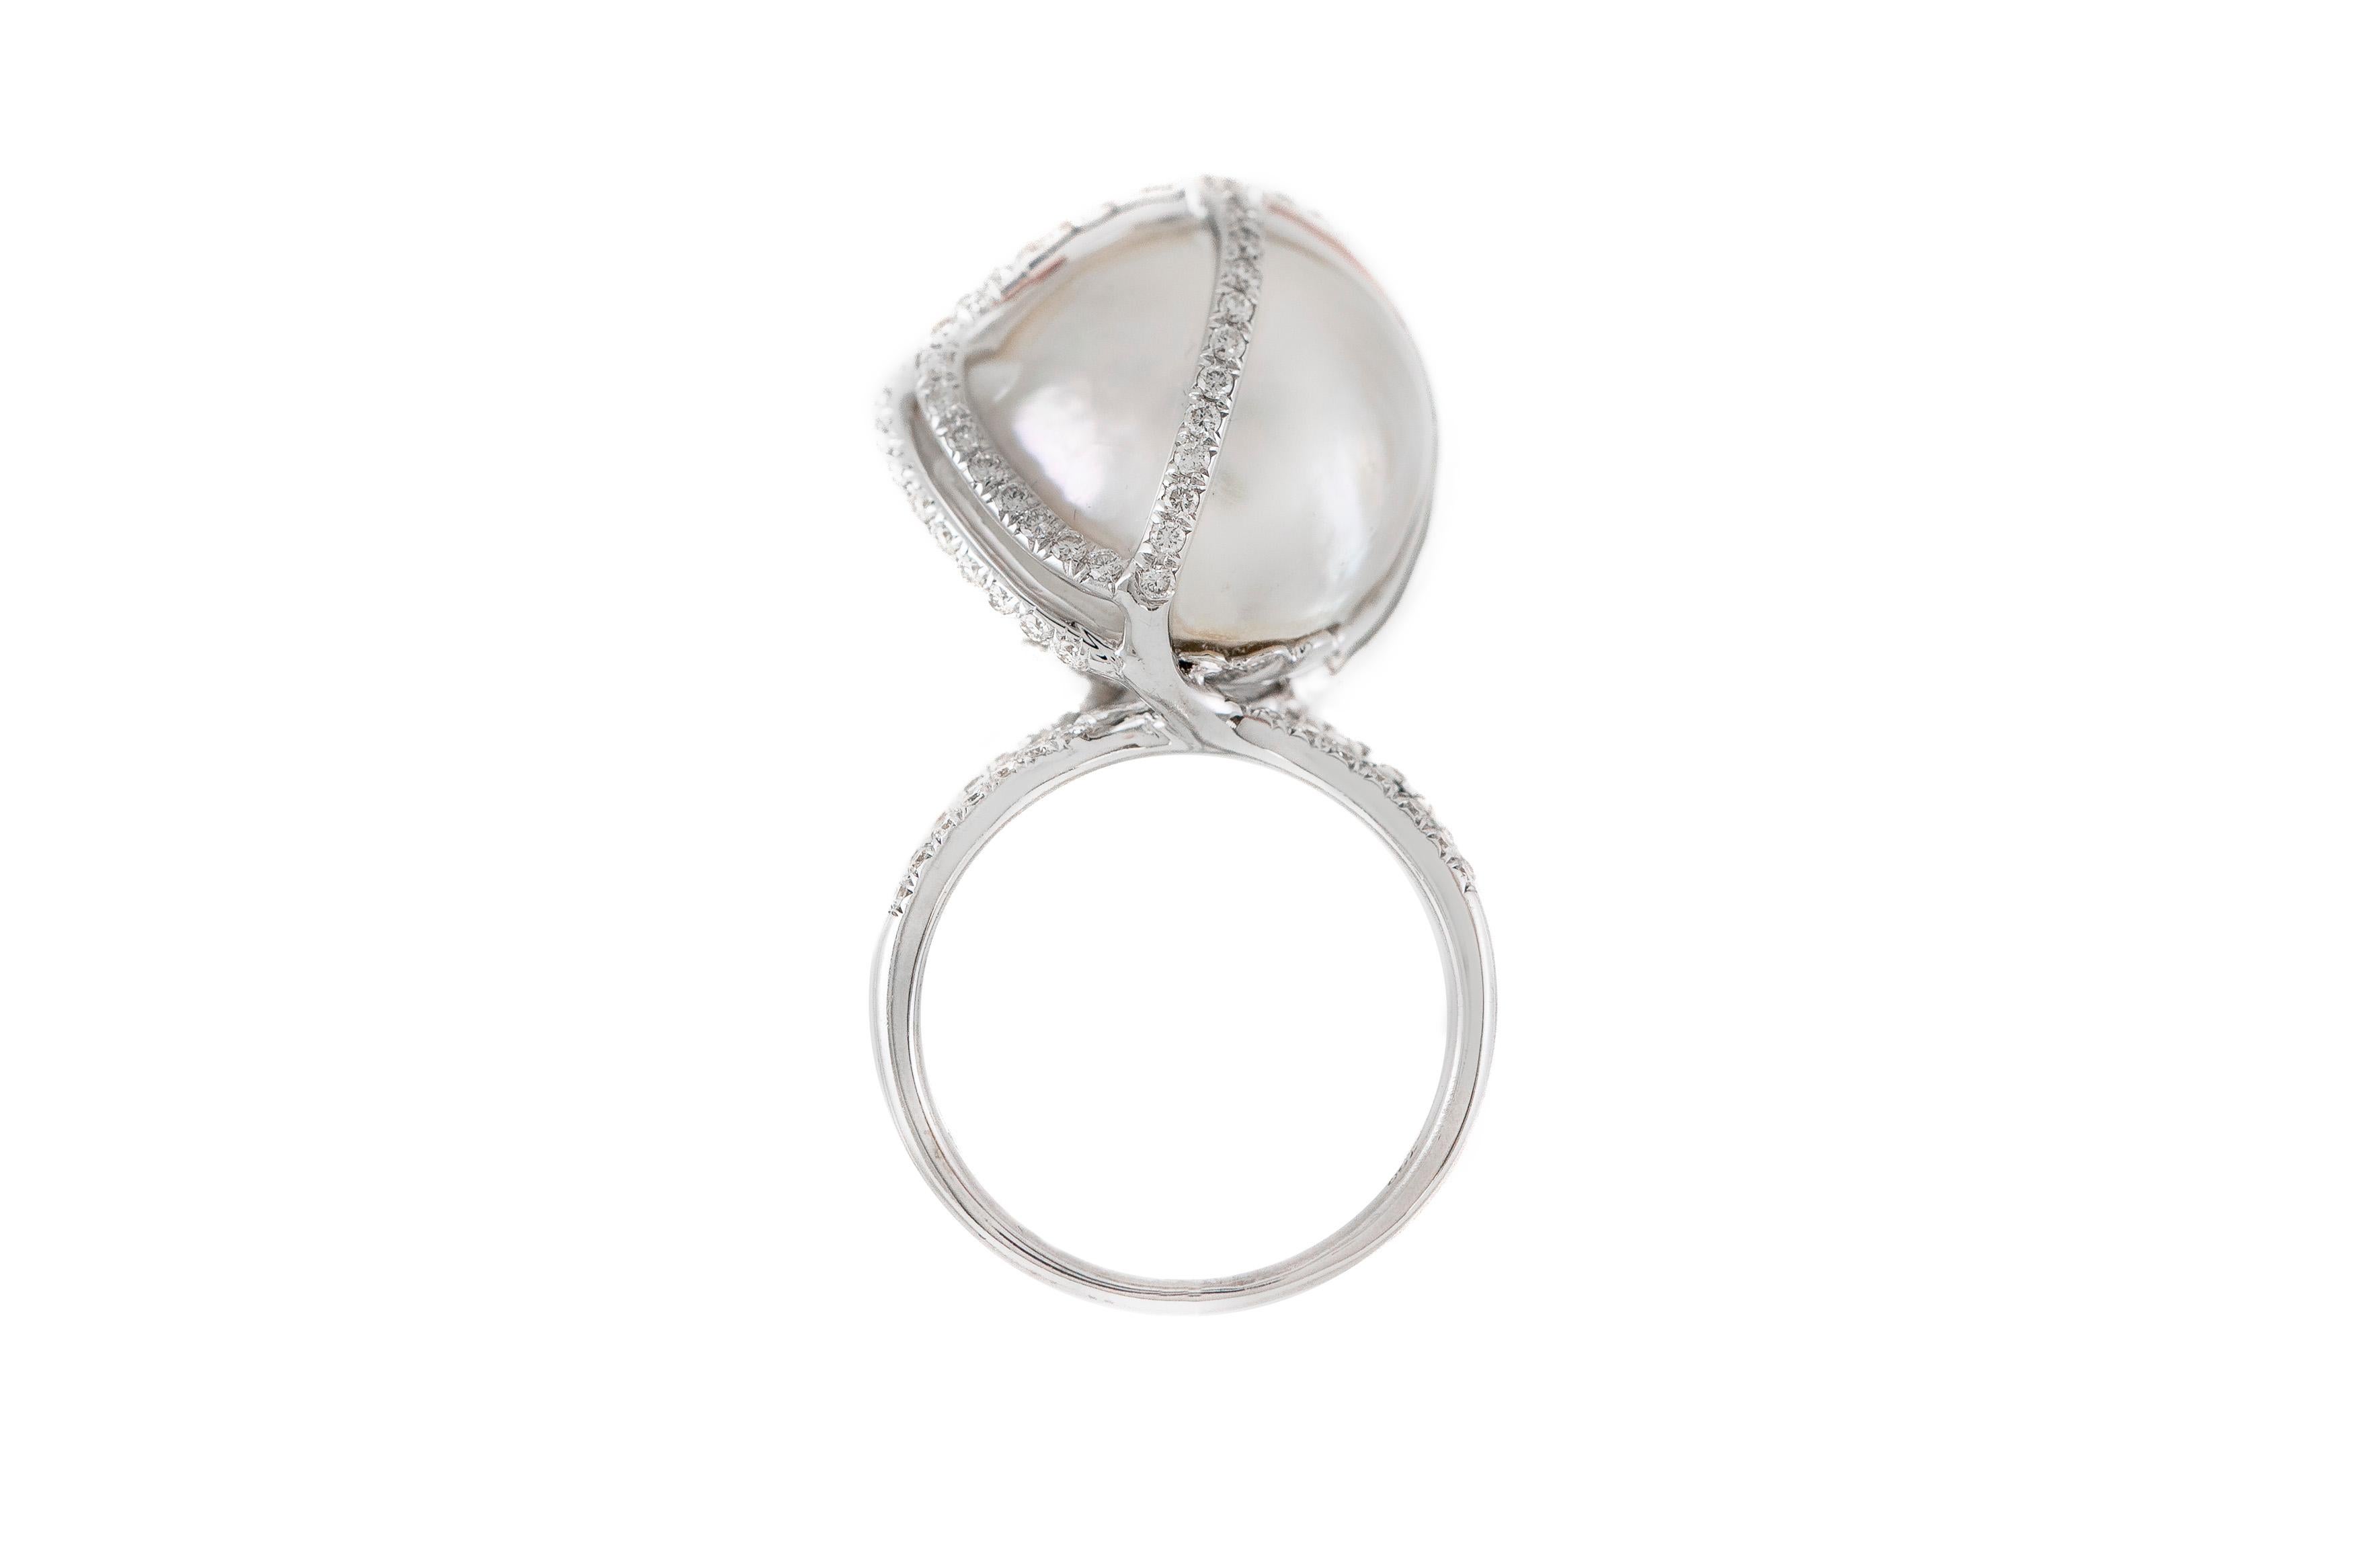 The ring is finely crafted in 18k white gold with center pearl and diamonds weighing approximately total of 1.50 carat.